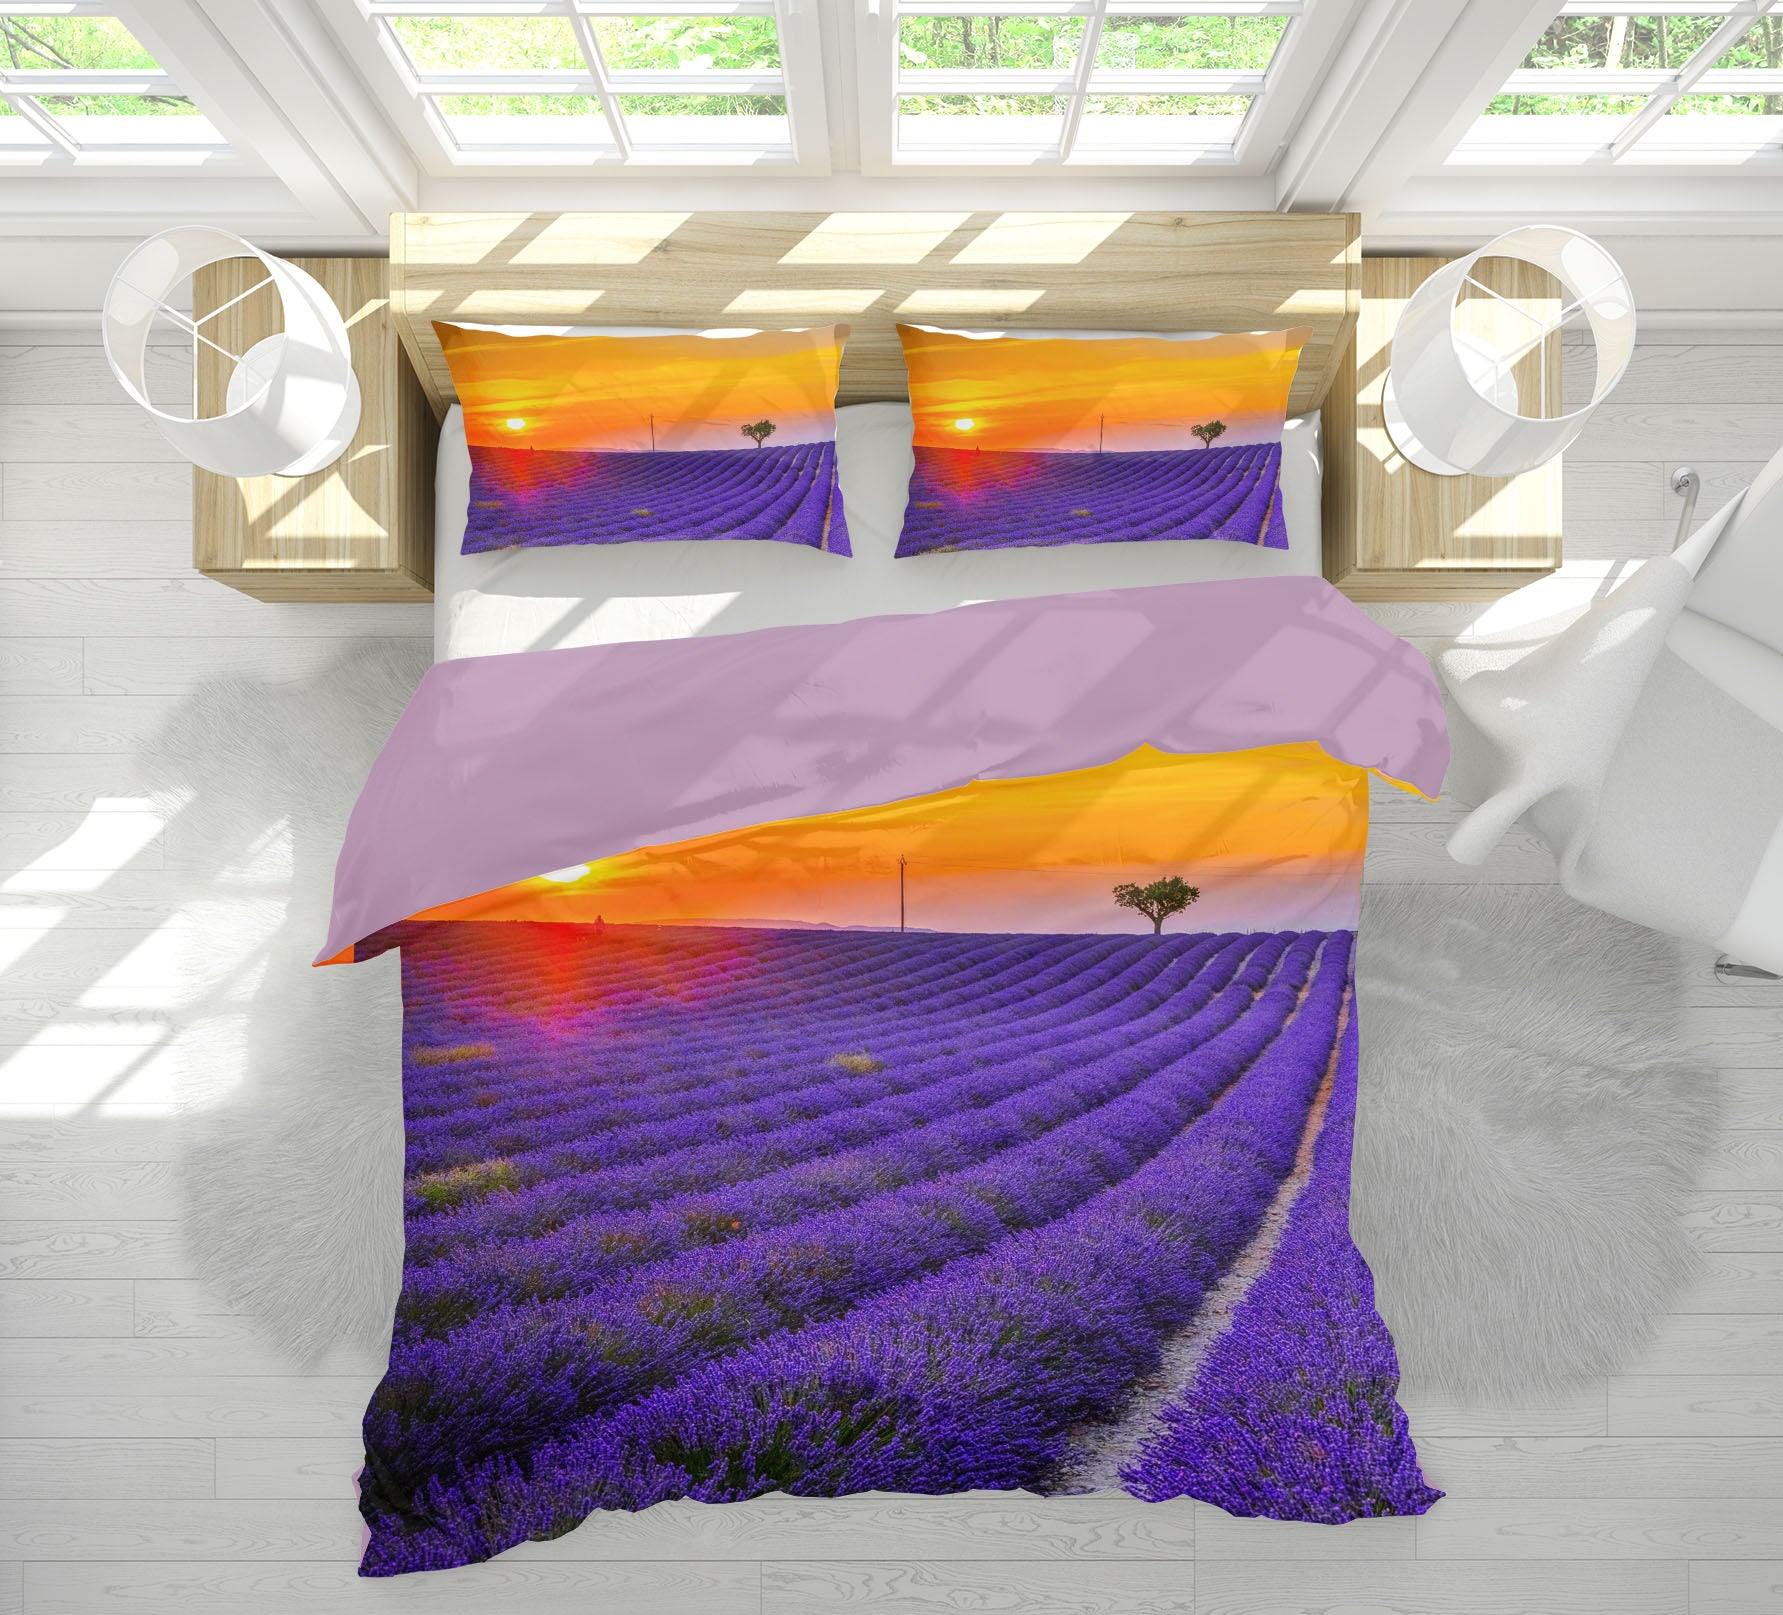 3D Valensole Lavender 165 Marco Carmassi Bedding Bed Pillowcases Quilt